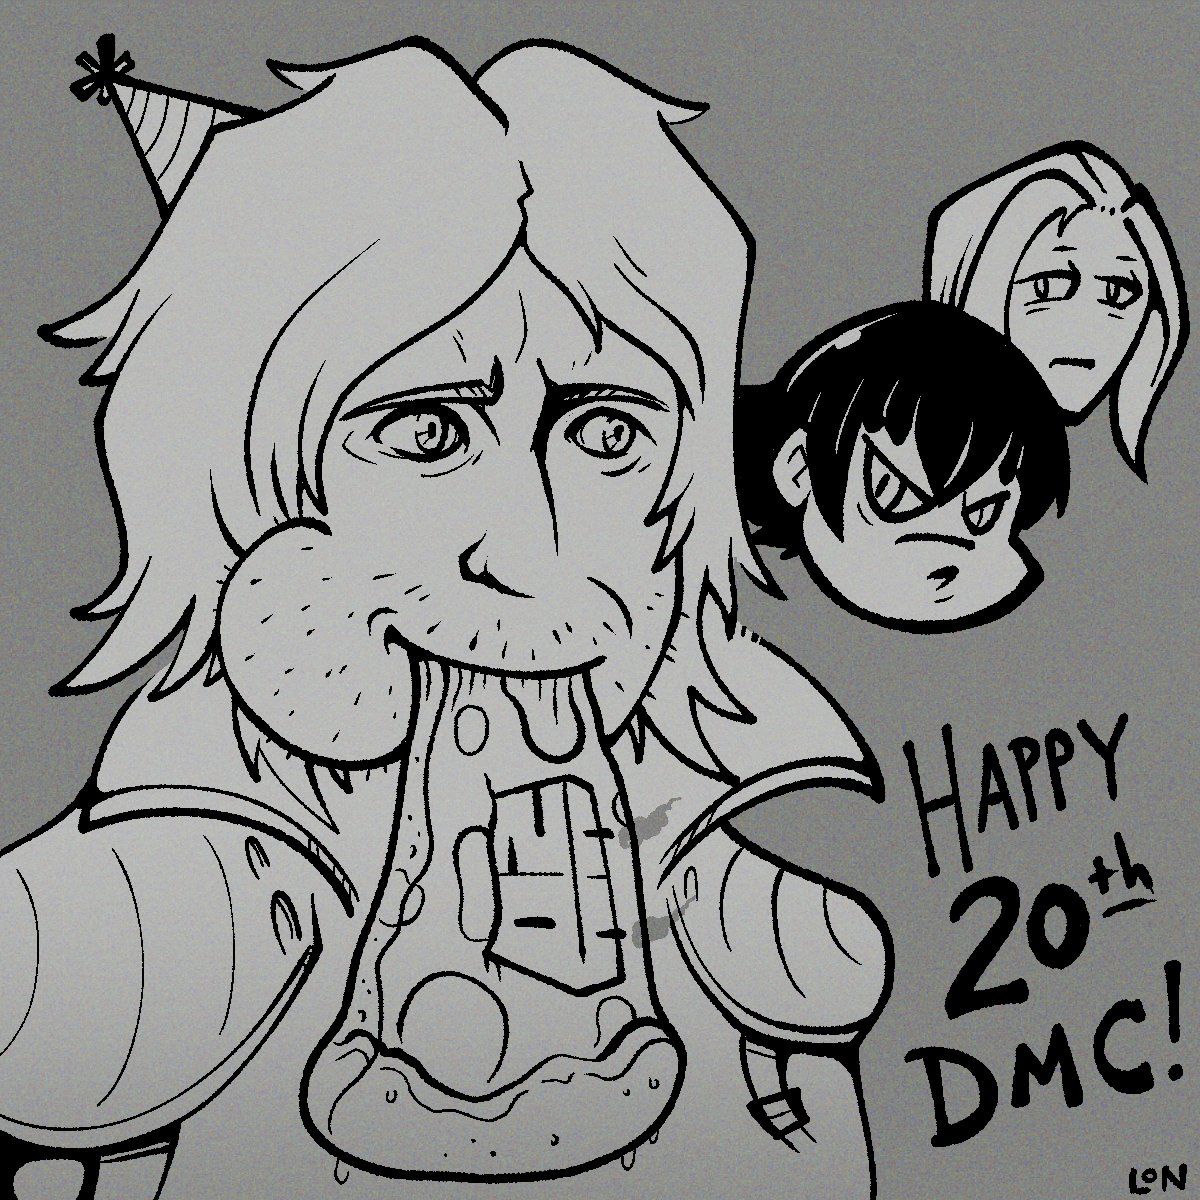 Happy 20th #DevilMayCry ! Sadly, this is all I have to offer you on your big day
#20YearsOfDMC #DMC20thAnniversary 